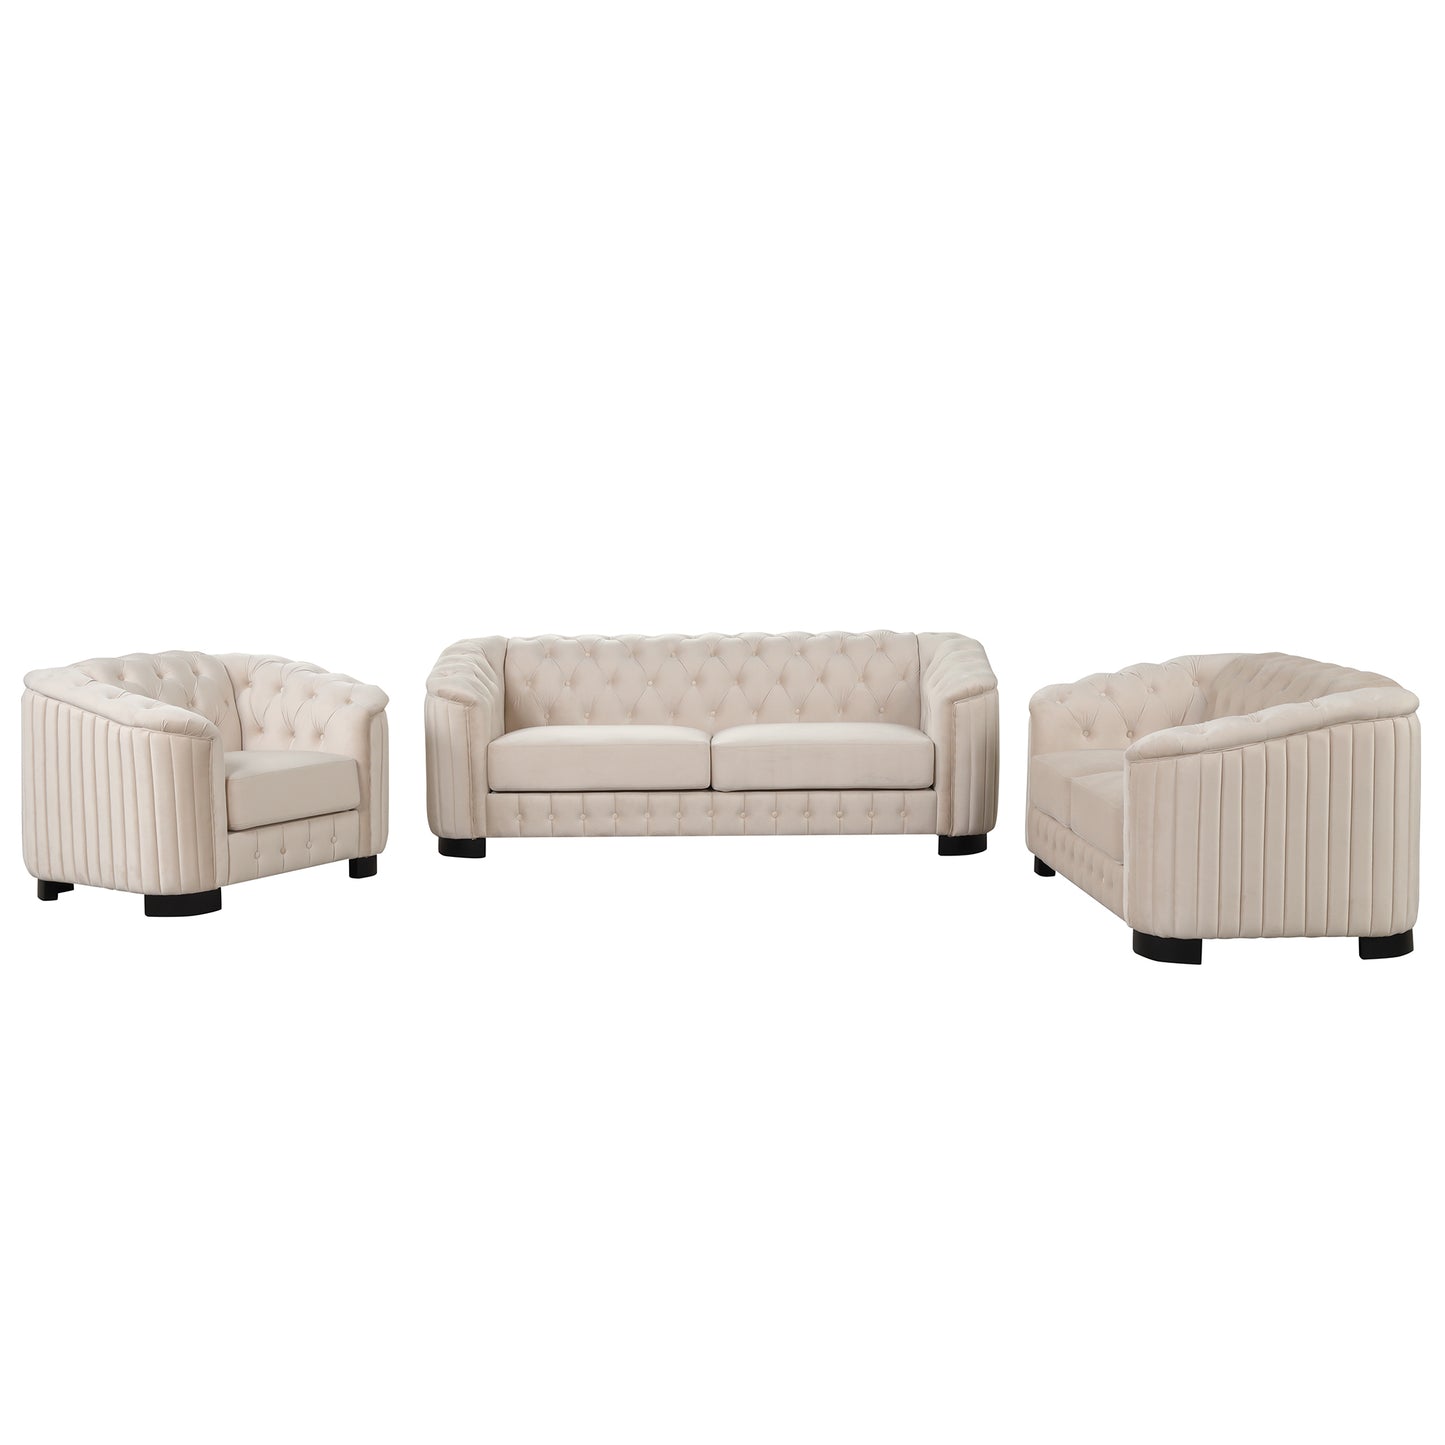 Modern 3-Piece Sofa Sets with Rubber Wood Legs,Velvet Upholstered Couches Sets Including Three Seat Sofa, Loveseat and Single Chair for Living Room Furniture Set,Beige - Enova Luxe Home Store